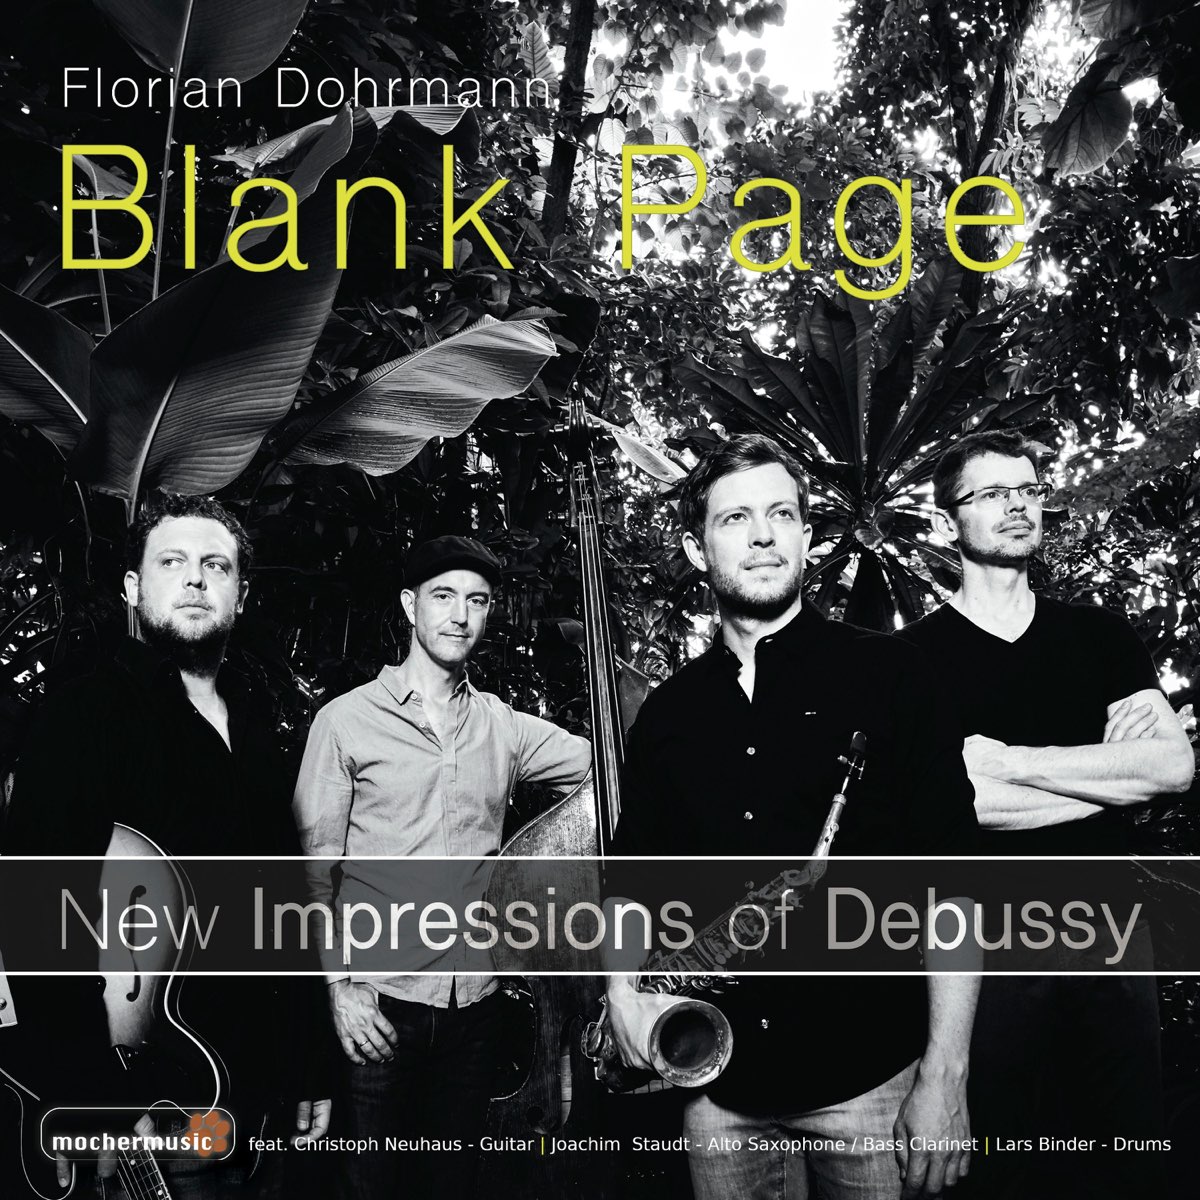 New Impressions of Debussy